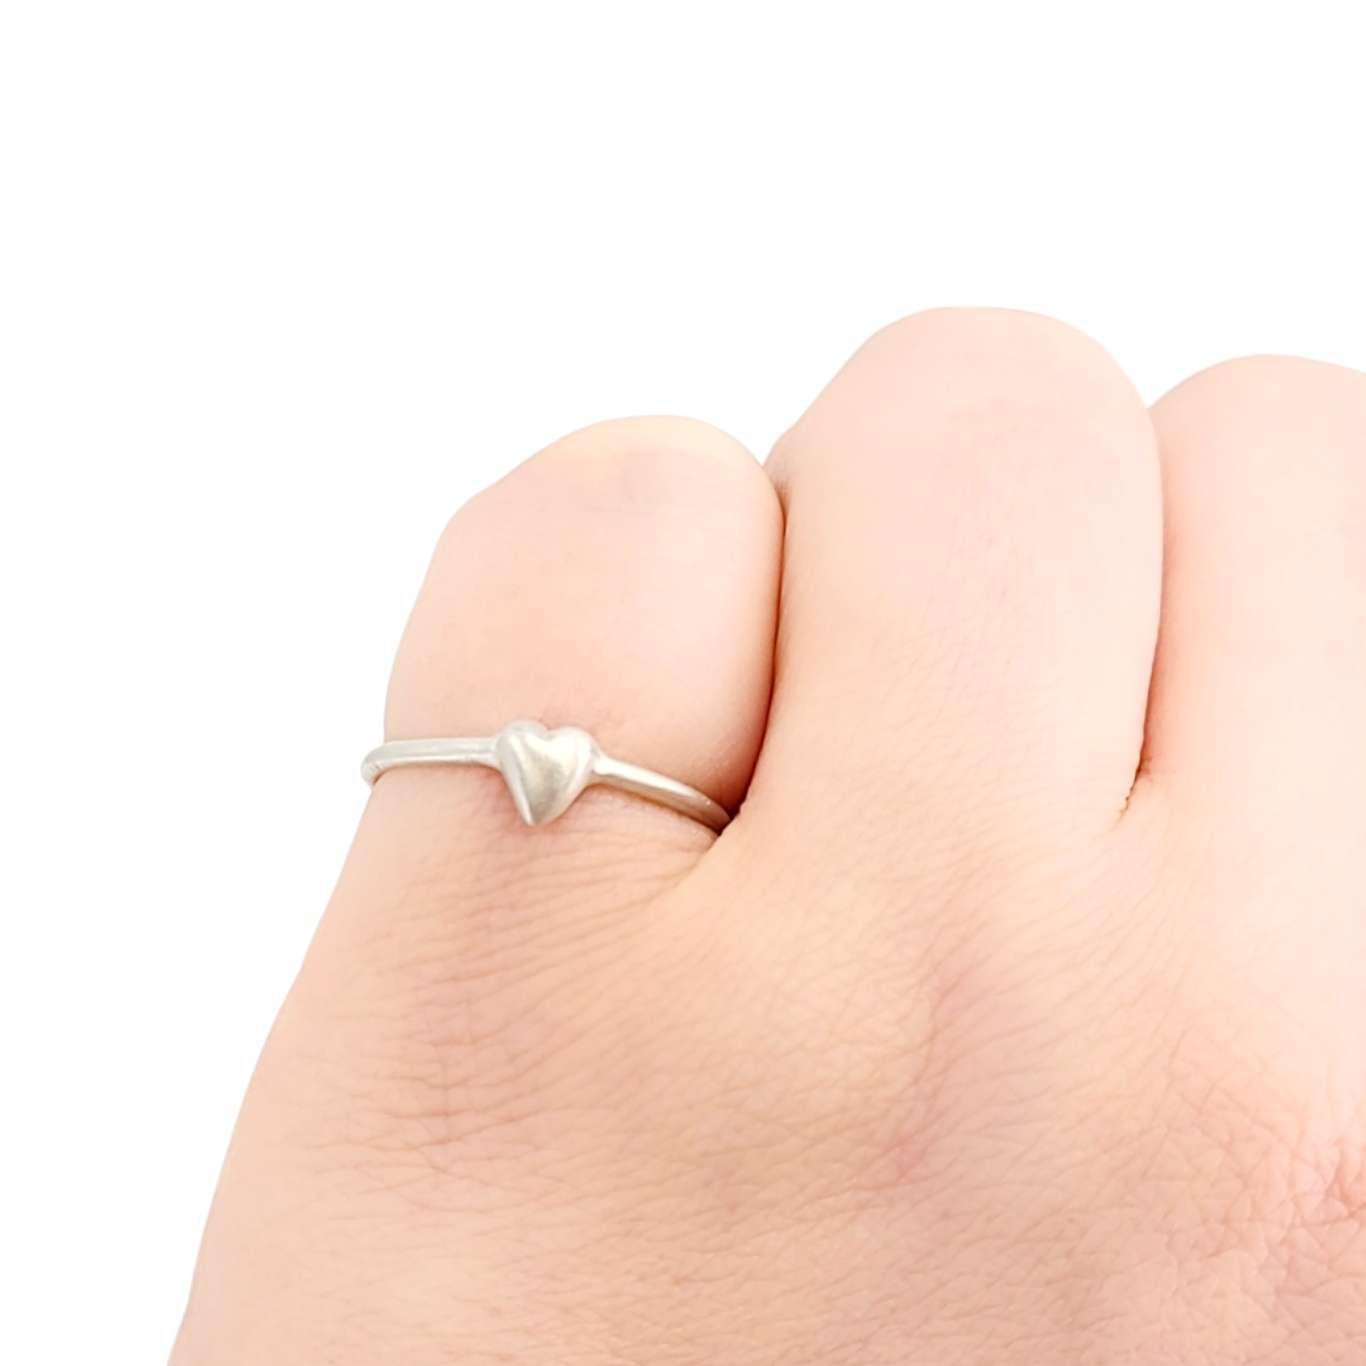 Ring - Tiny Puff Heart in Sterling Silver by Michelle Chang